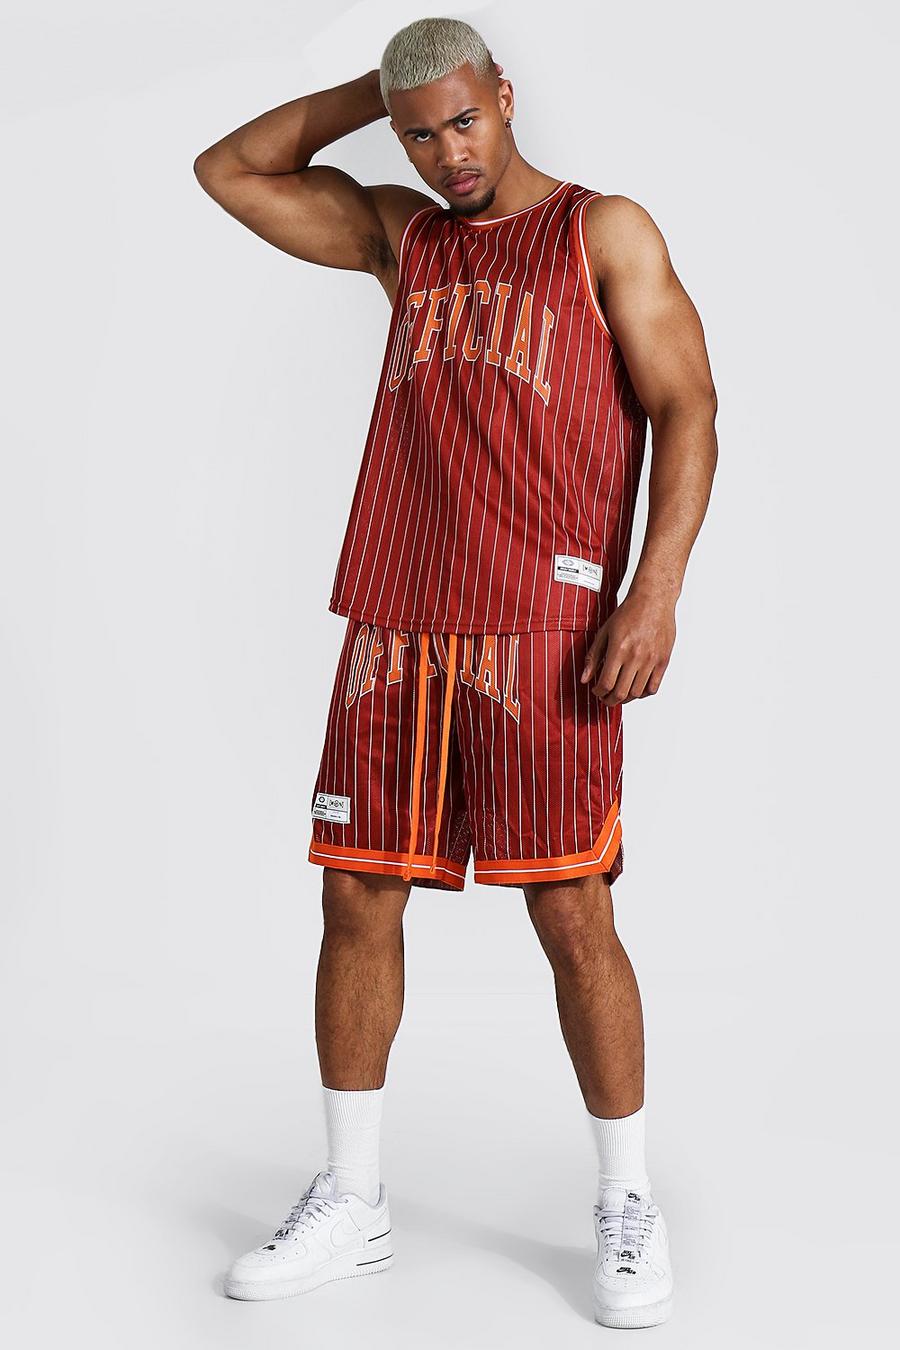 Brown Official Striped Mesh Tank Top And Basketball Set image number 1